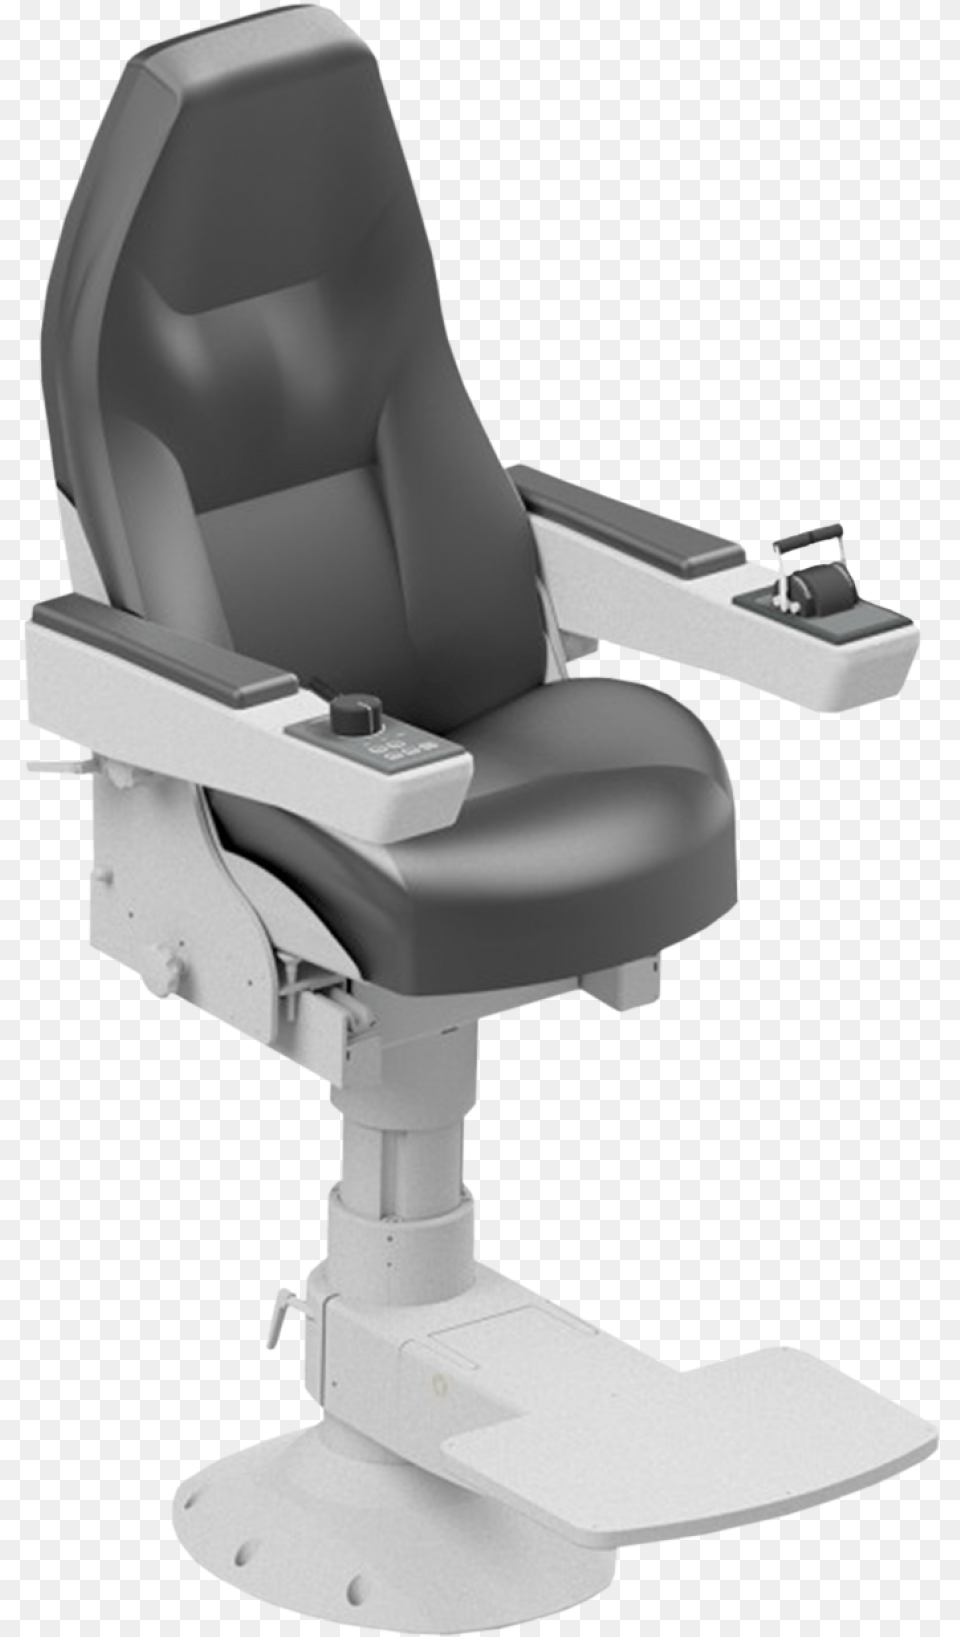 Alphachair Office Chair, Cushion, Home Decor, Furniture, Headrest Free Png Download